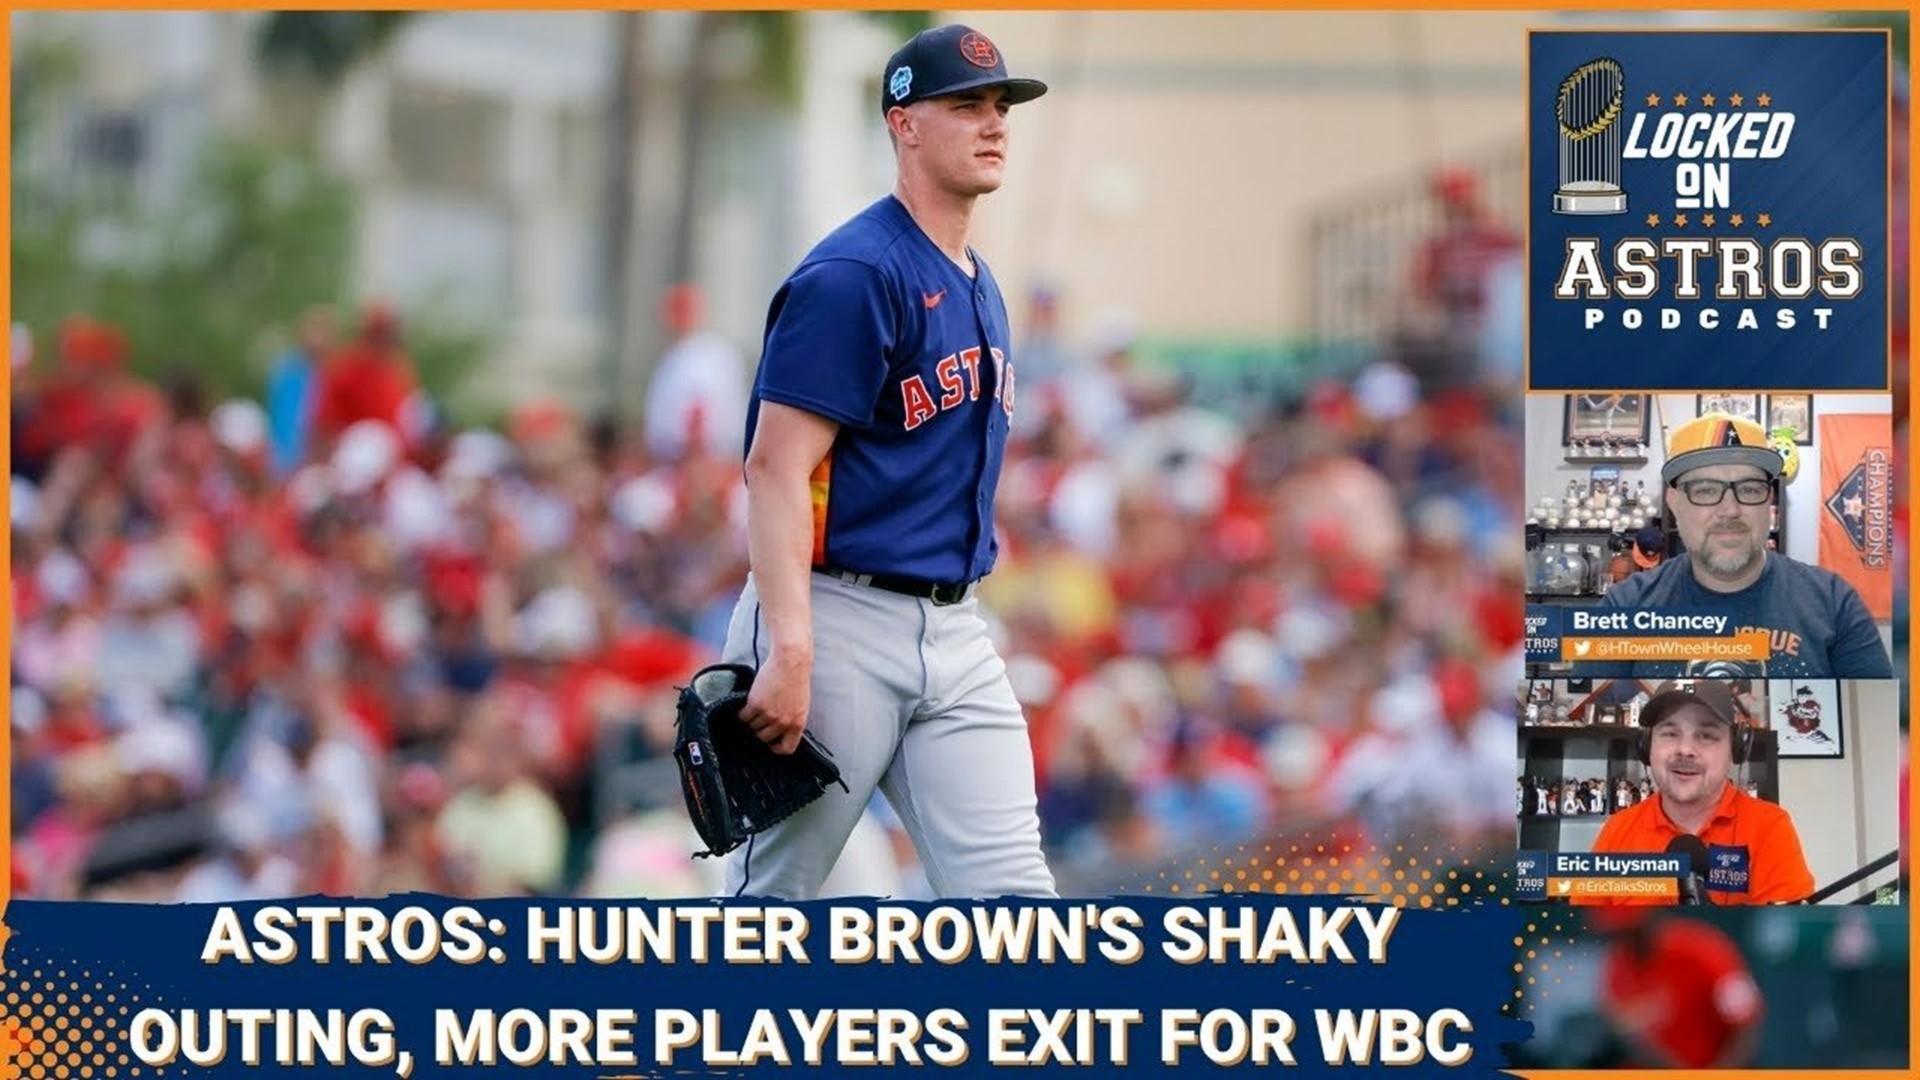 Astros: Hunter Brown's Shaky Outing, More Players Exit for WBC